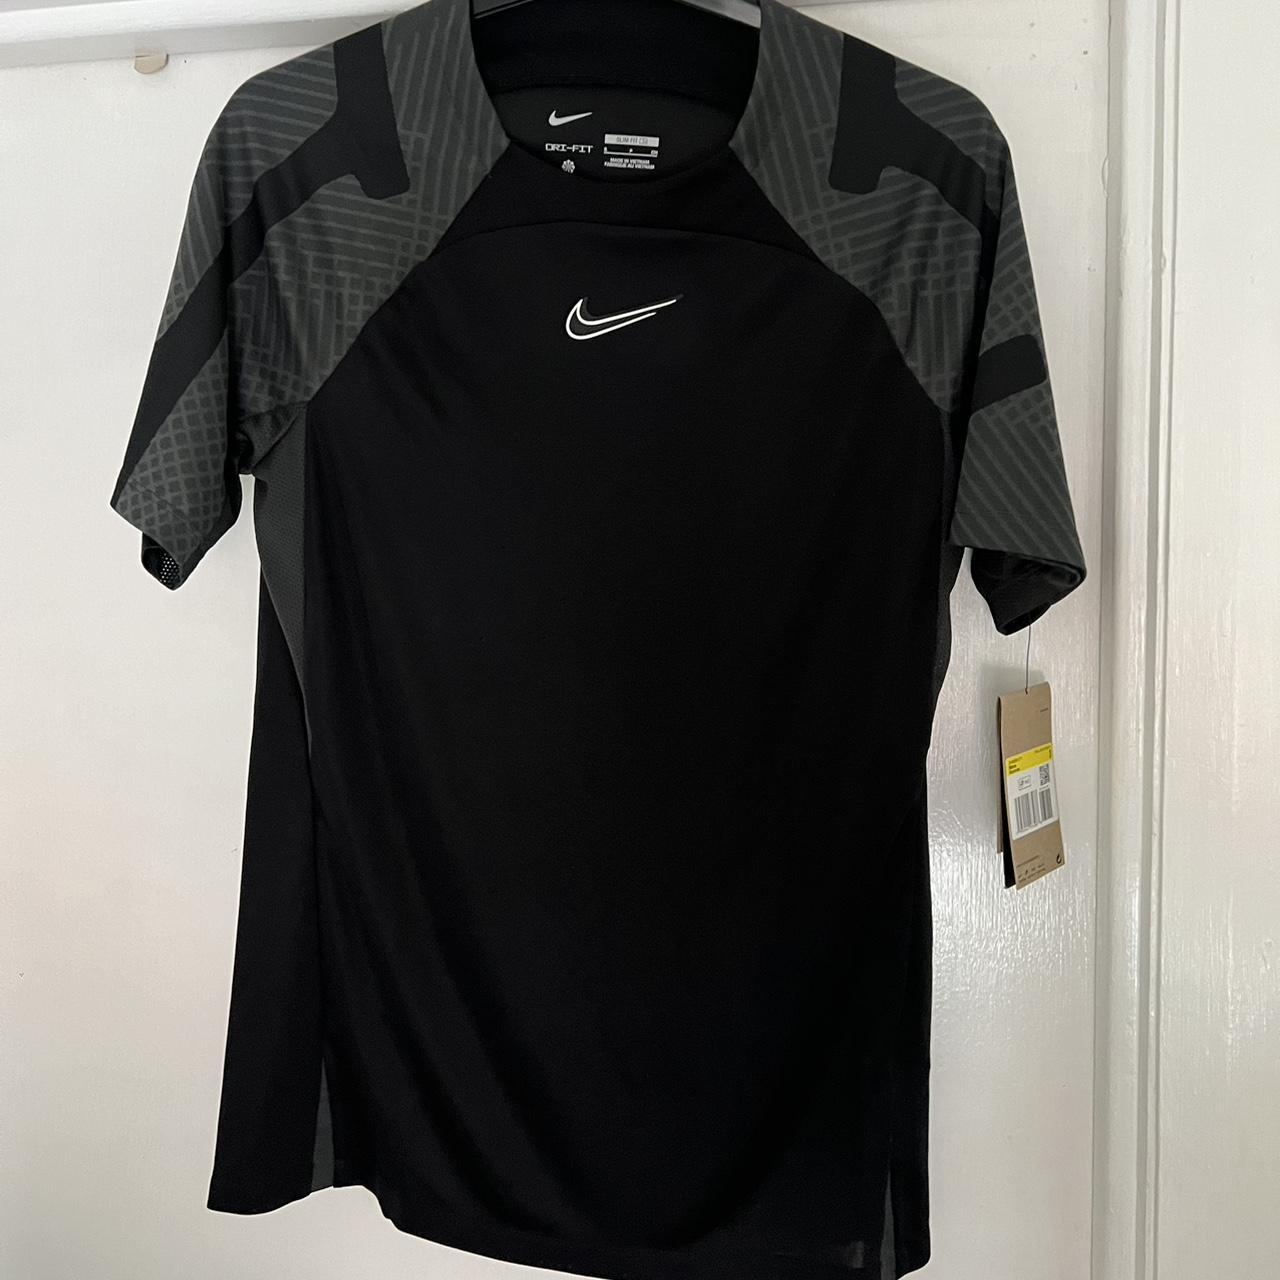 Mens Nike shirt Brand new with tags Size S... - Depop